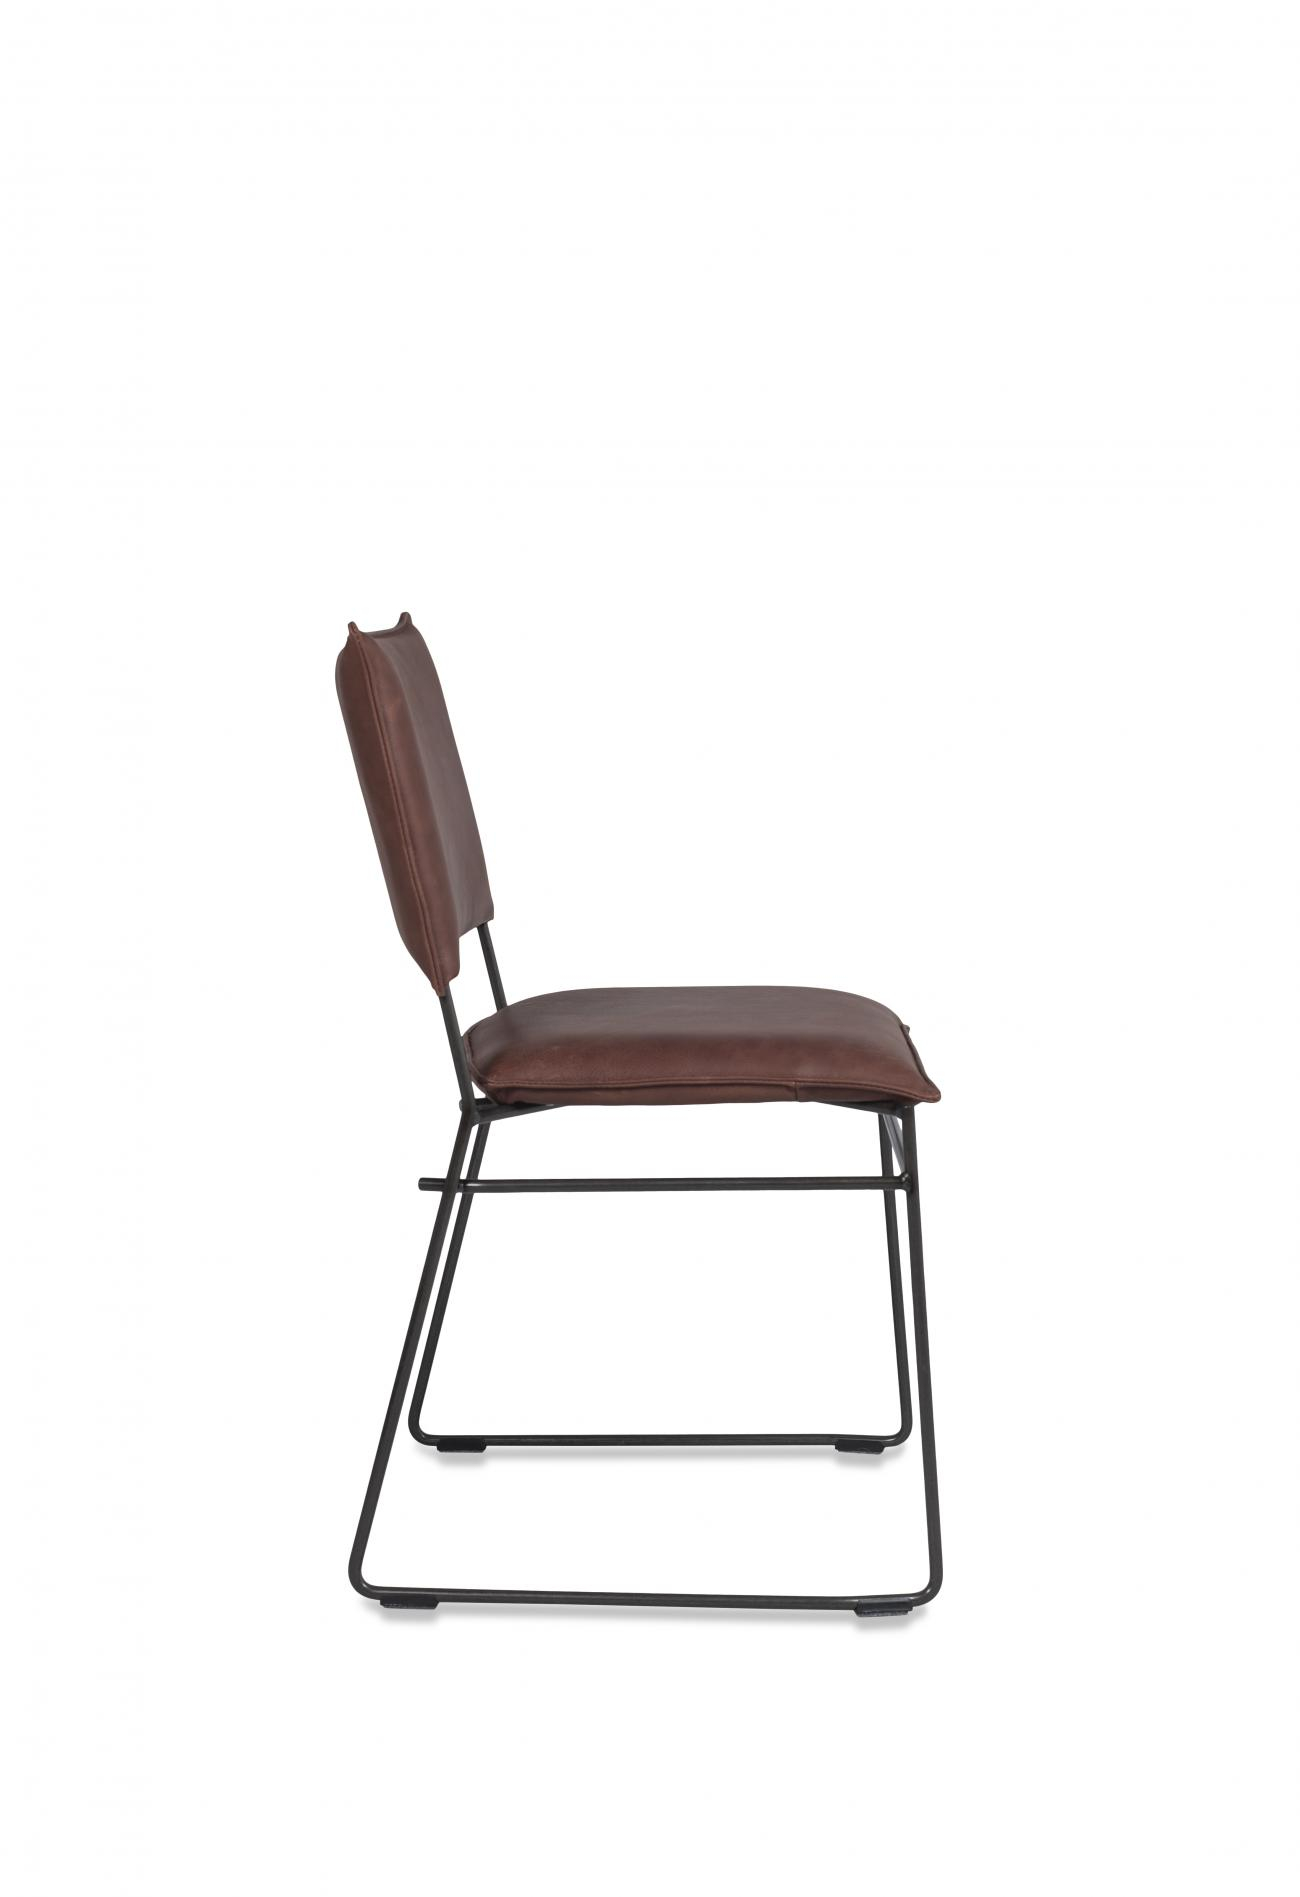 https://www.fundesign.nl/media/catalog/product/n/o/norman_diningchair_stackable_frame_old_glory_bonanza_british_tan_side.jpg